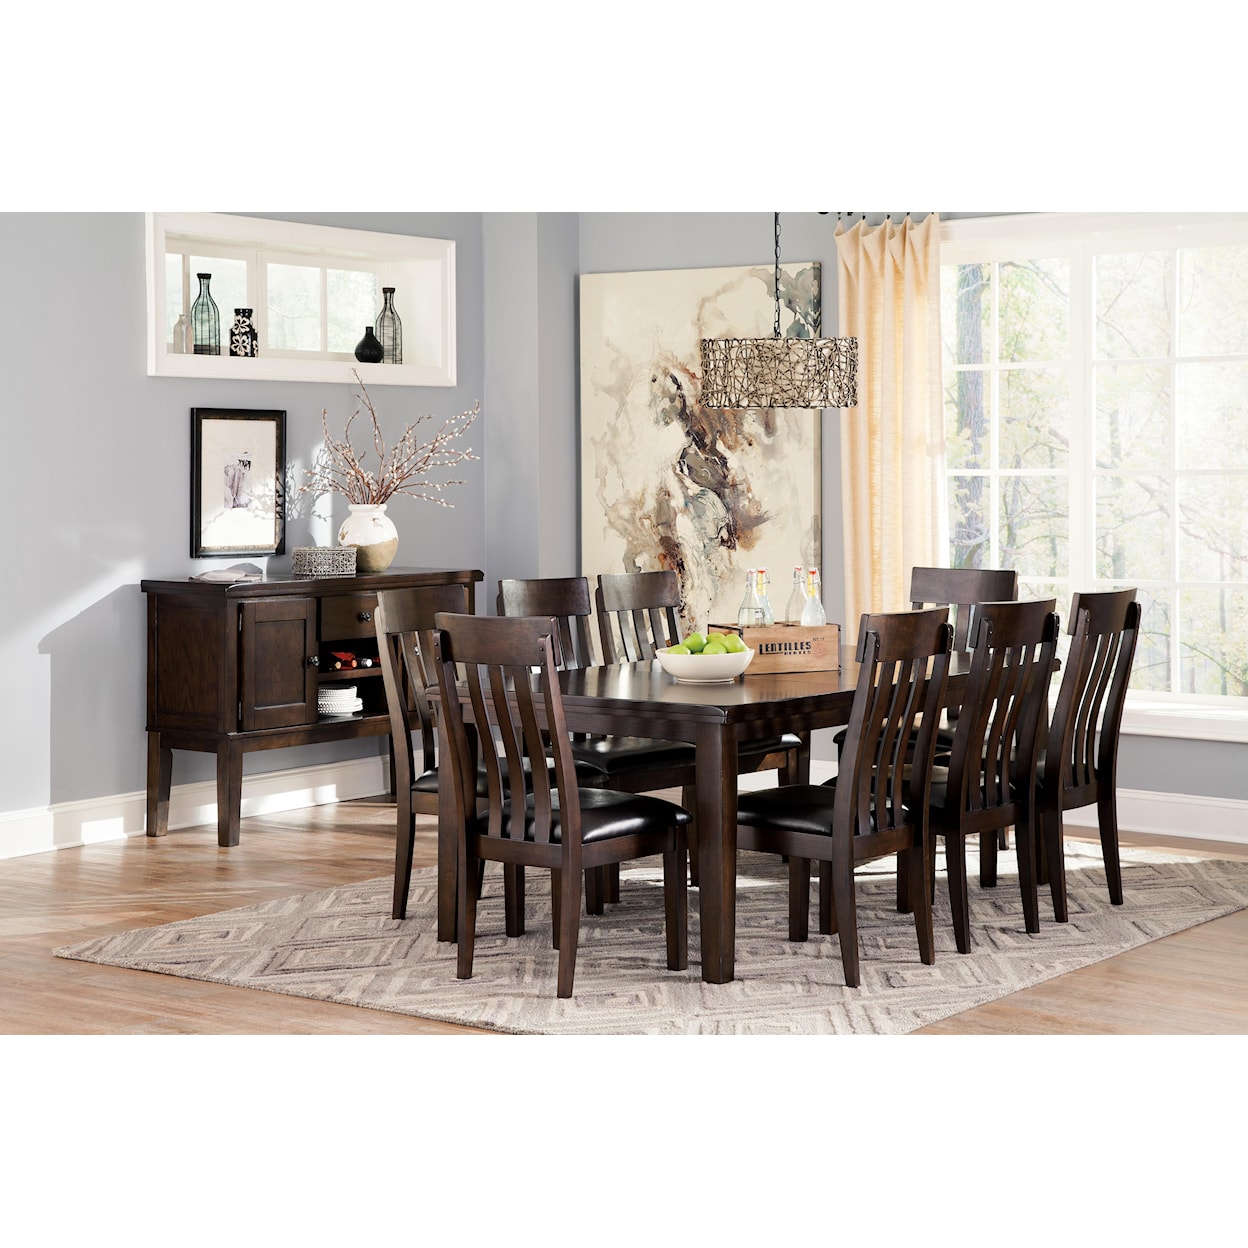 Ashley Haddigan Dining Upholstered Side Chair